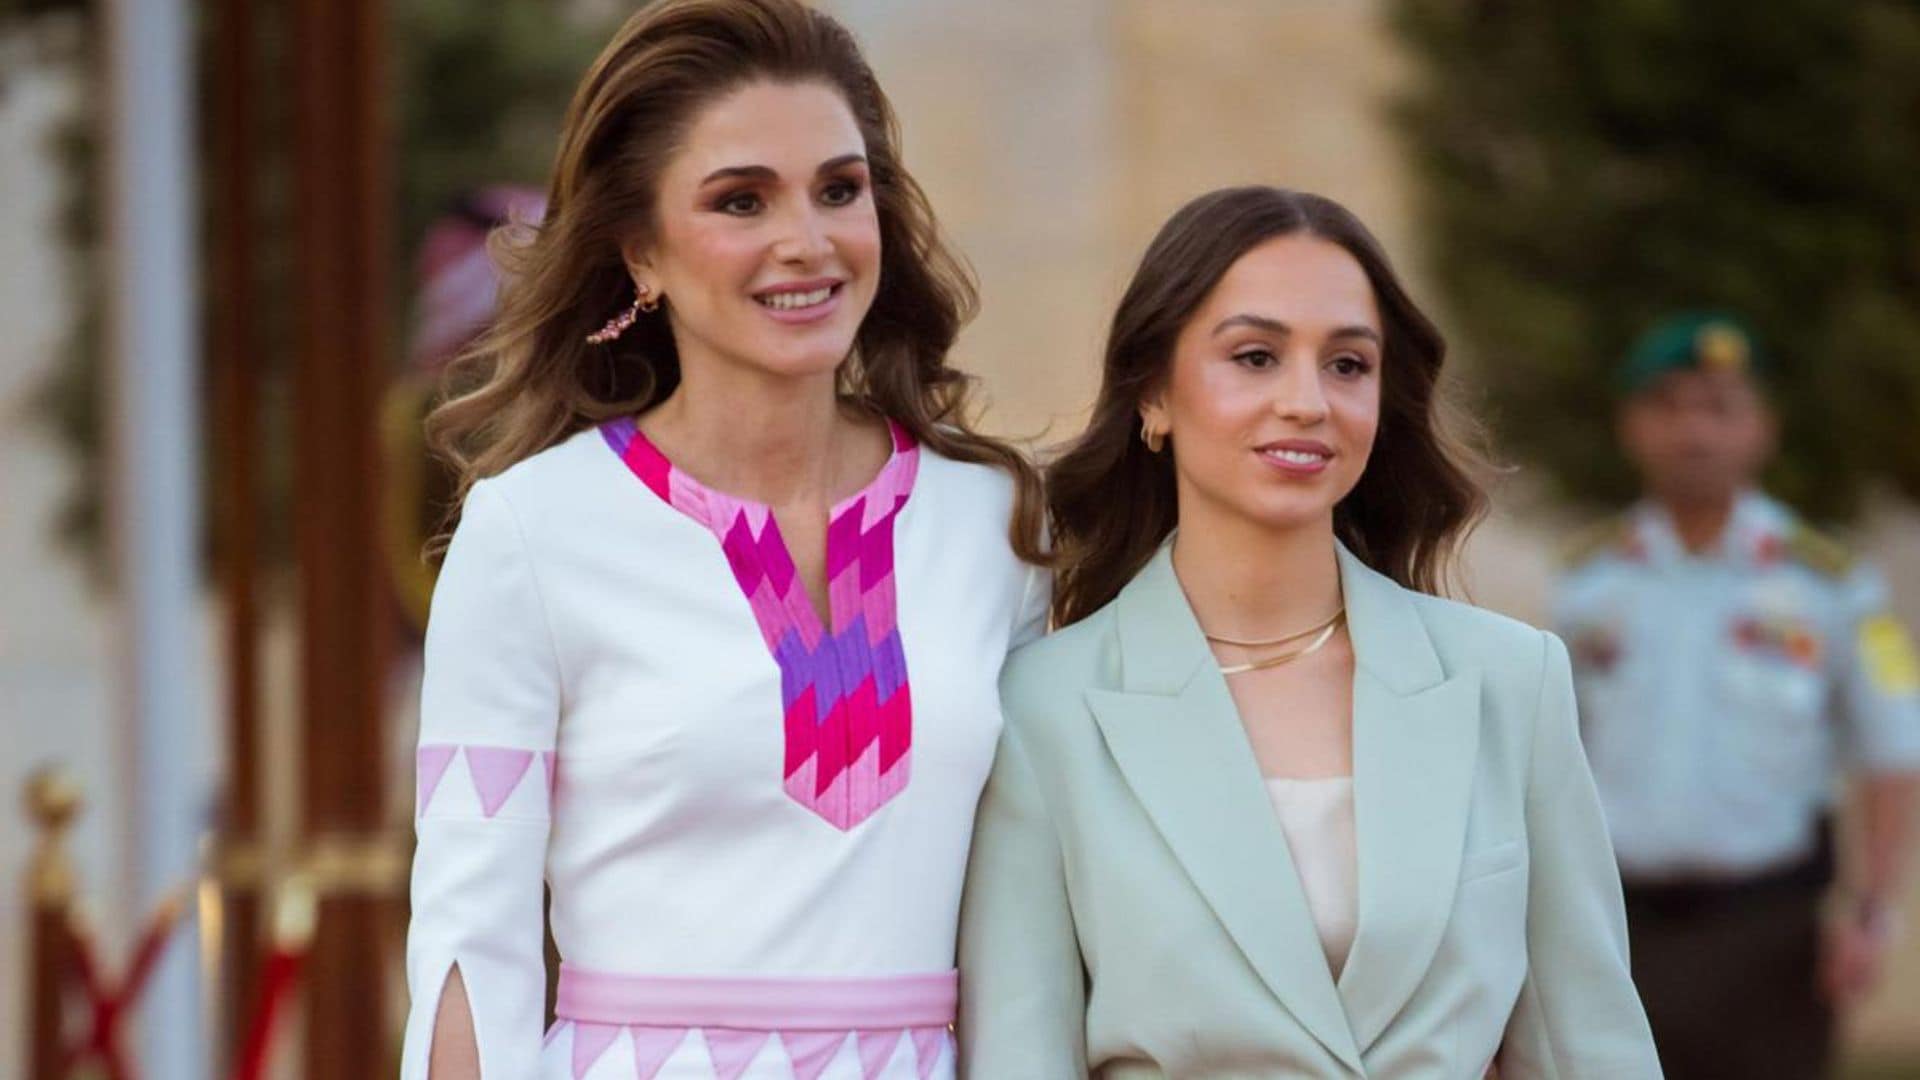 Queen Rania of Jordan's daughter is engaged: See her ring